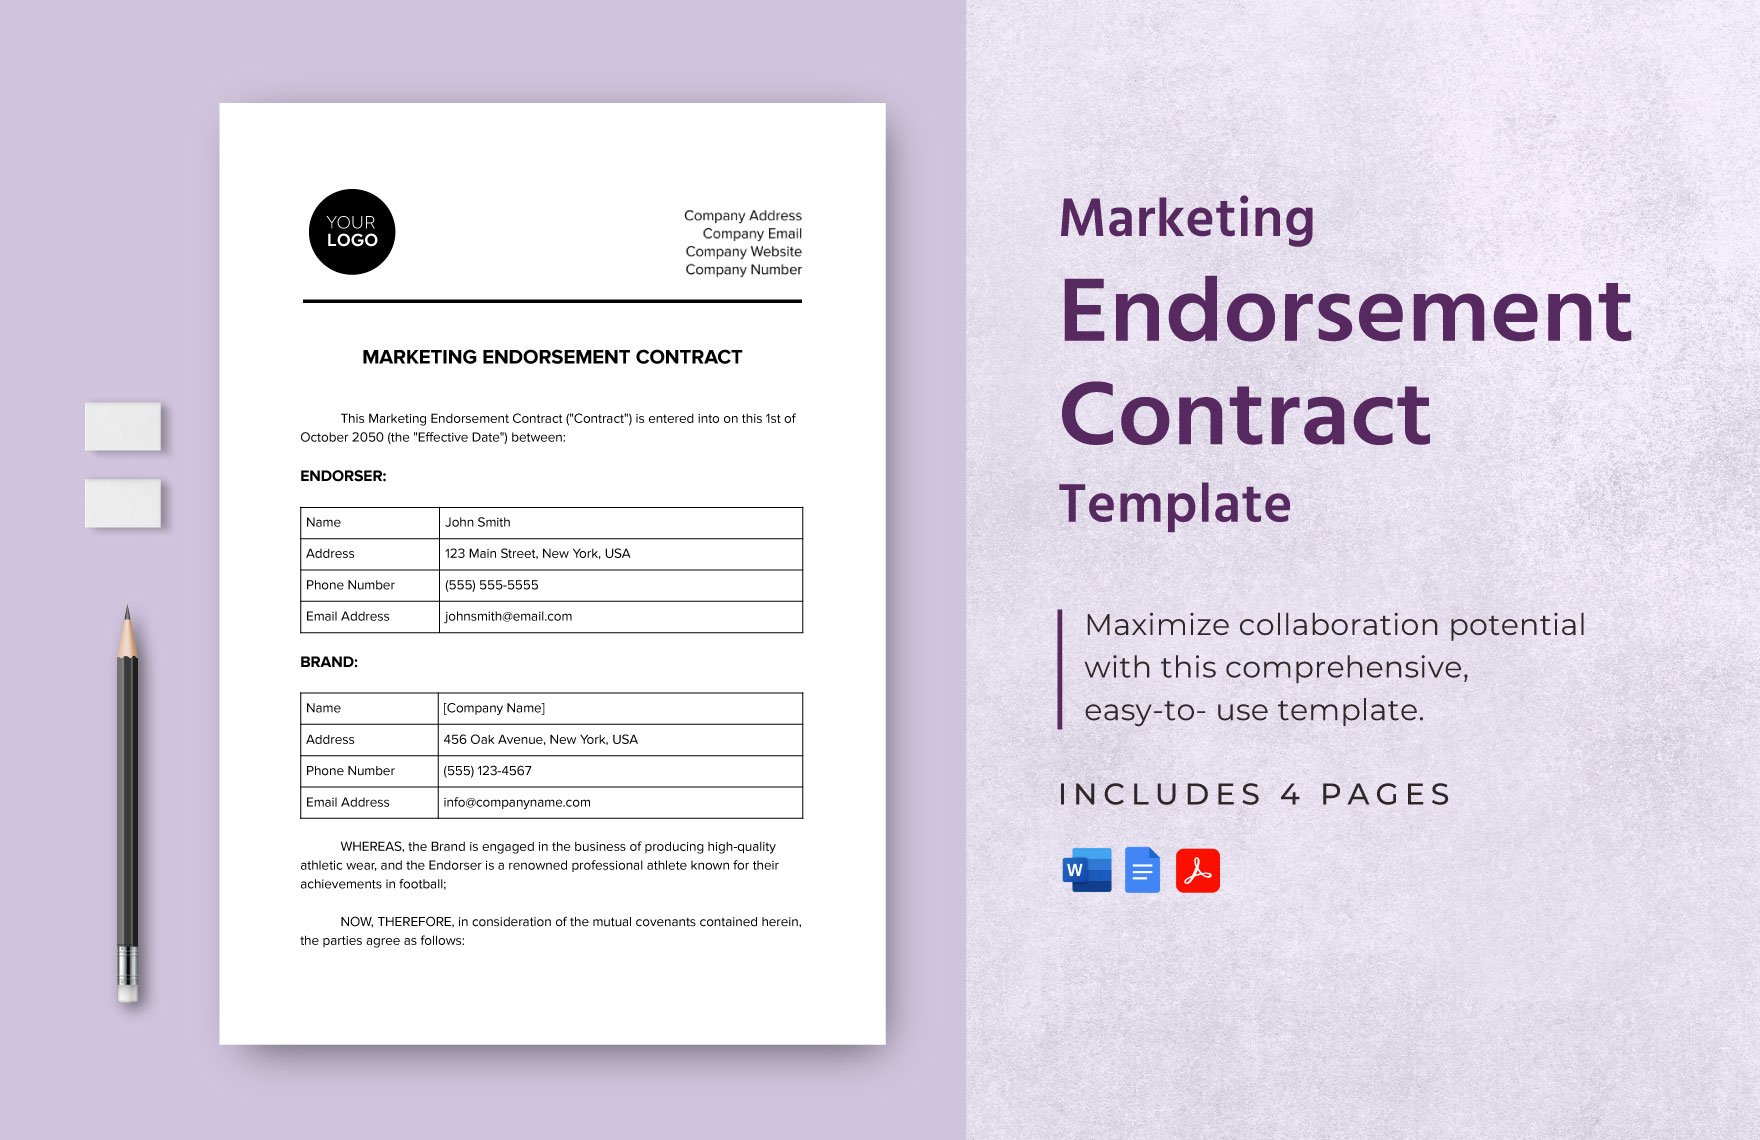 Marketing Endorsement Contract Template in Word, Google Docs, PDF